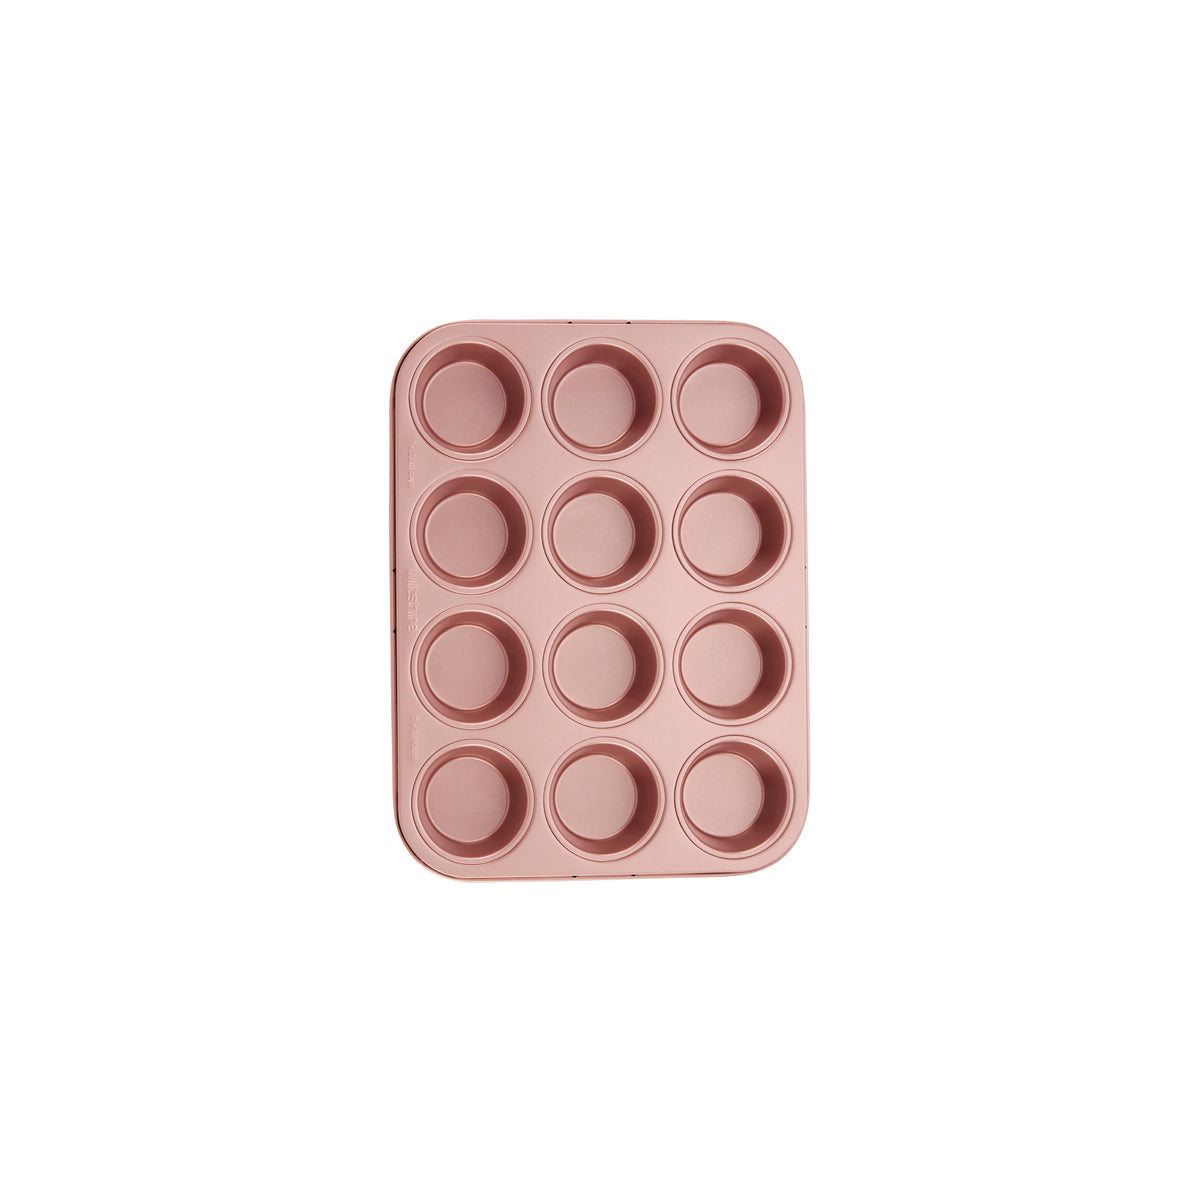 Silicone Muffin Pan 6 Cup - Wiltshire Australia